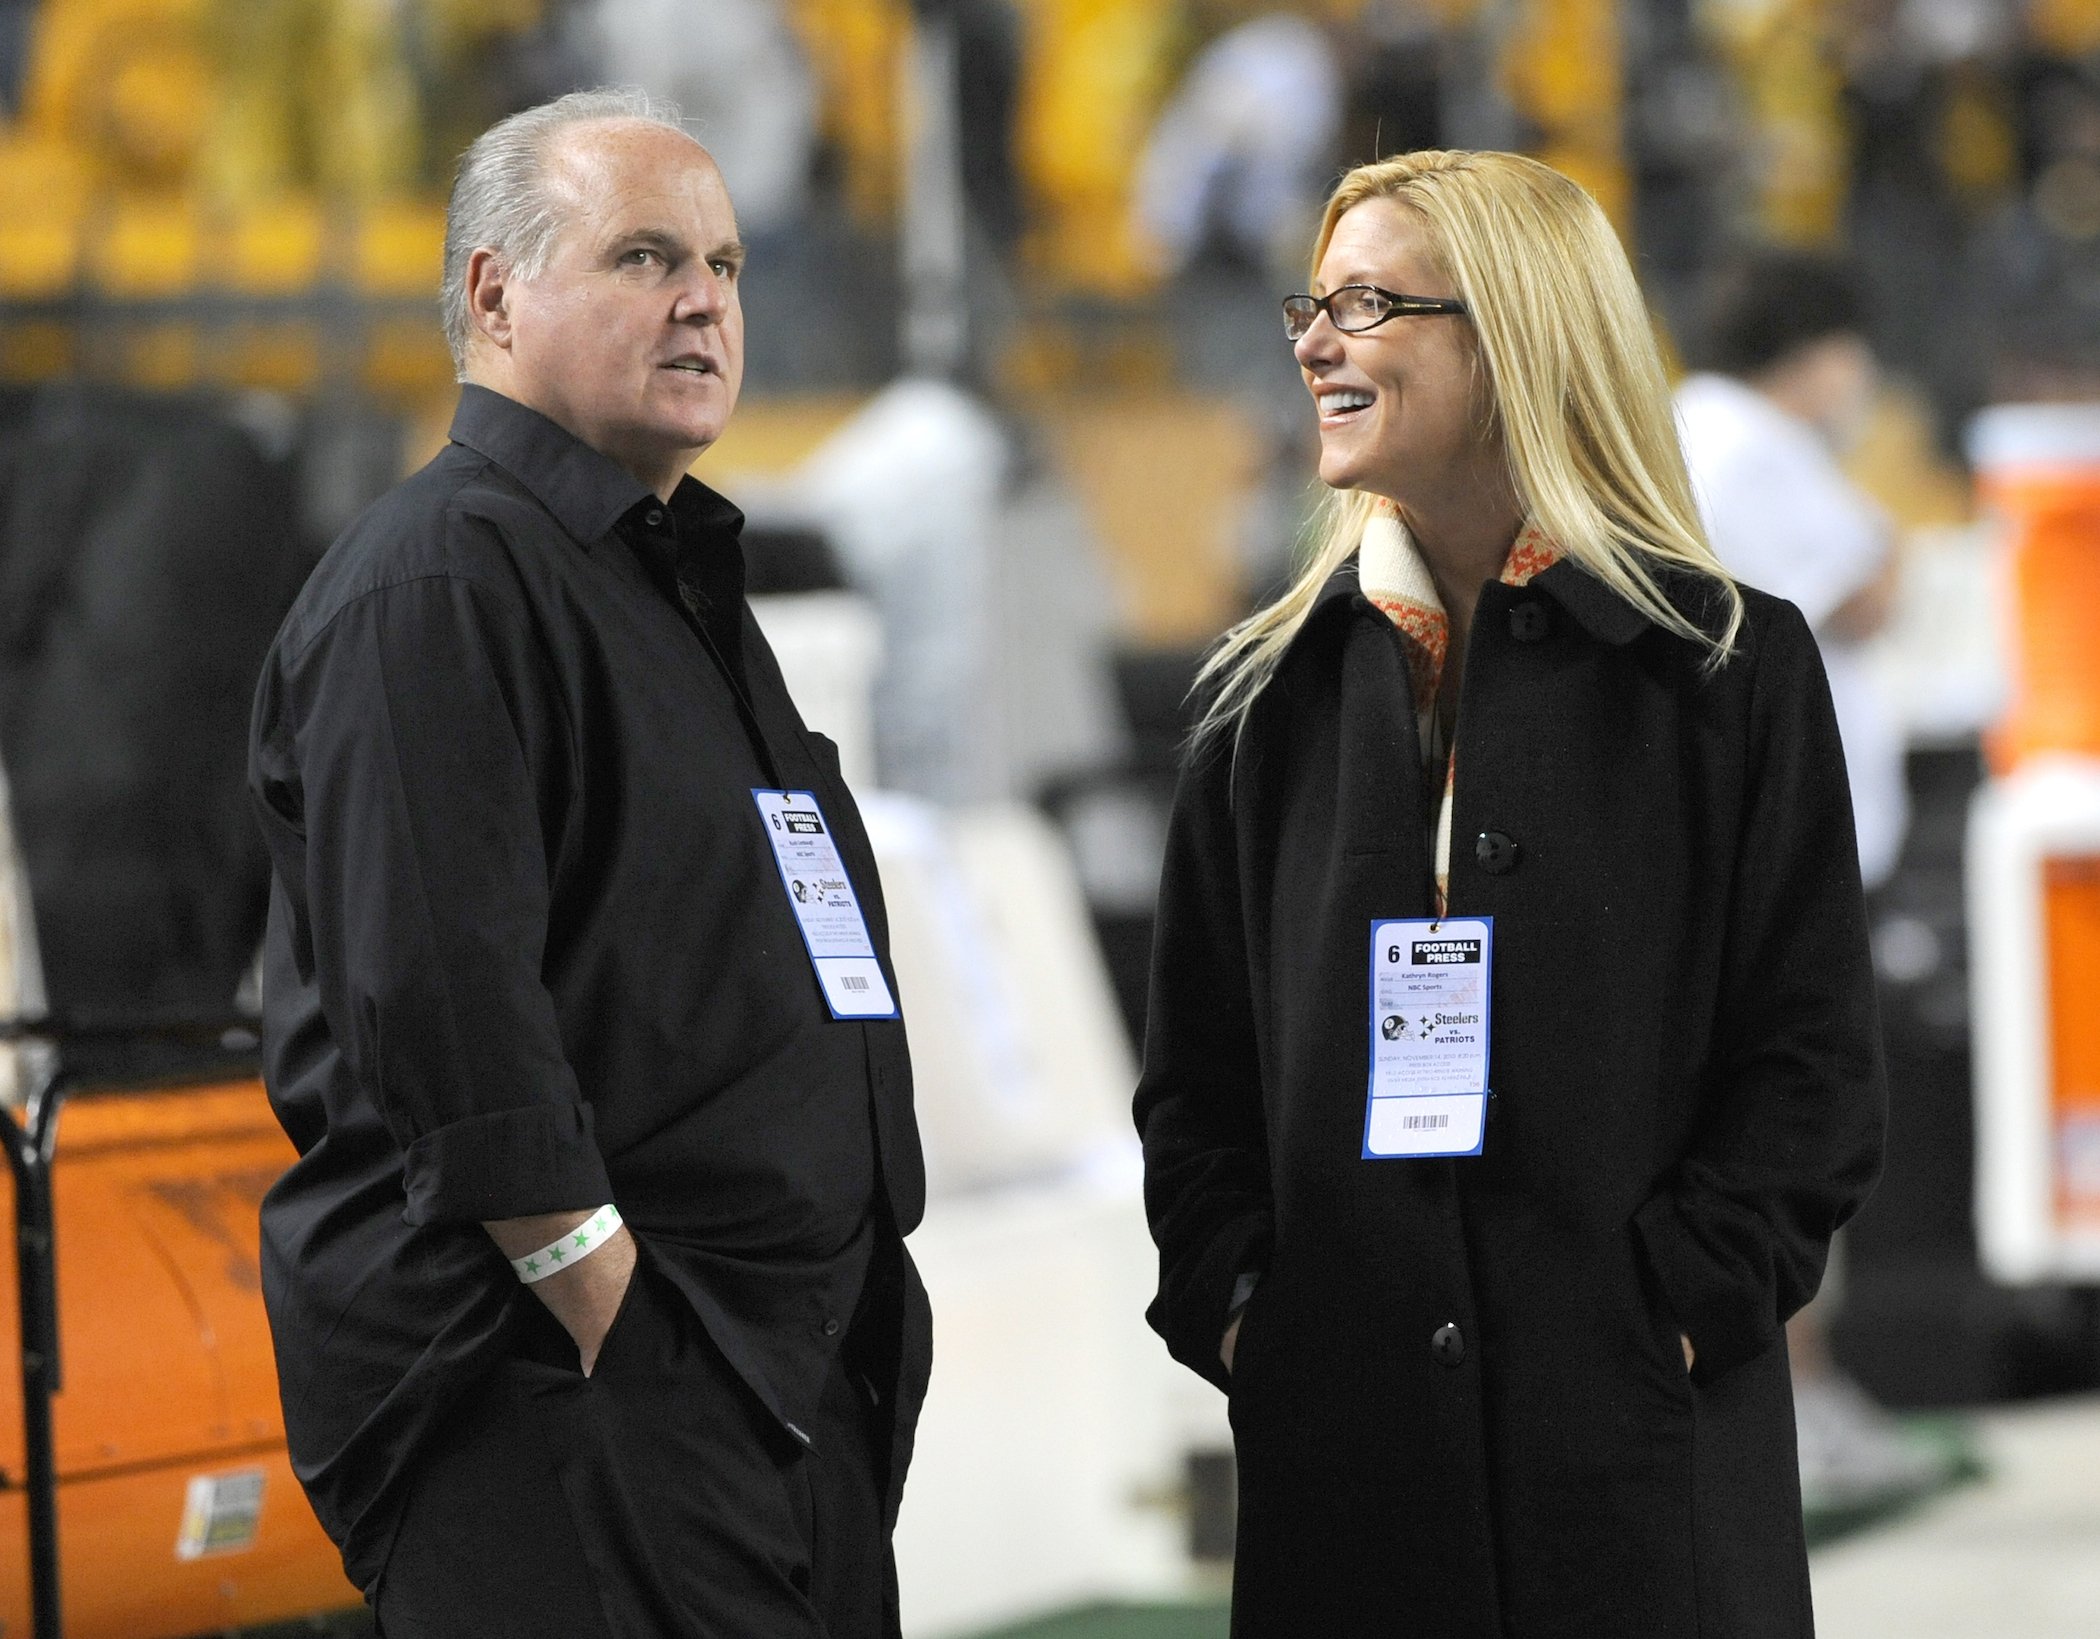 Rush Limbaugh (L) and his wife, Kathryn Adams Limbaugh, standing on the sidelines of a football game 